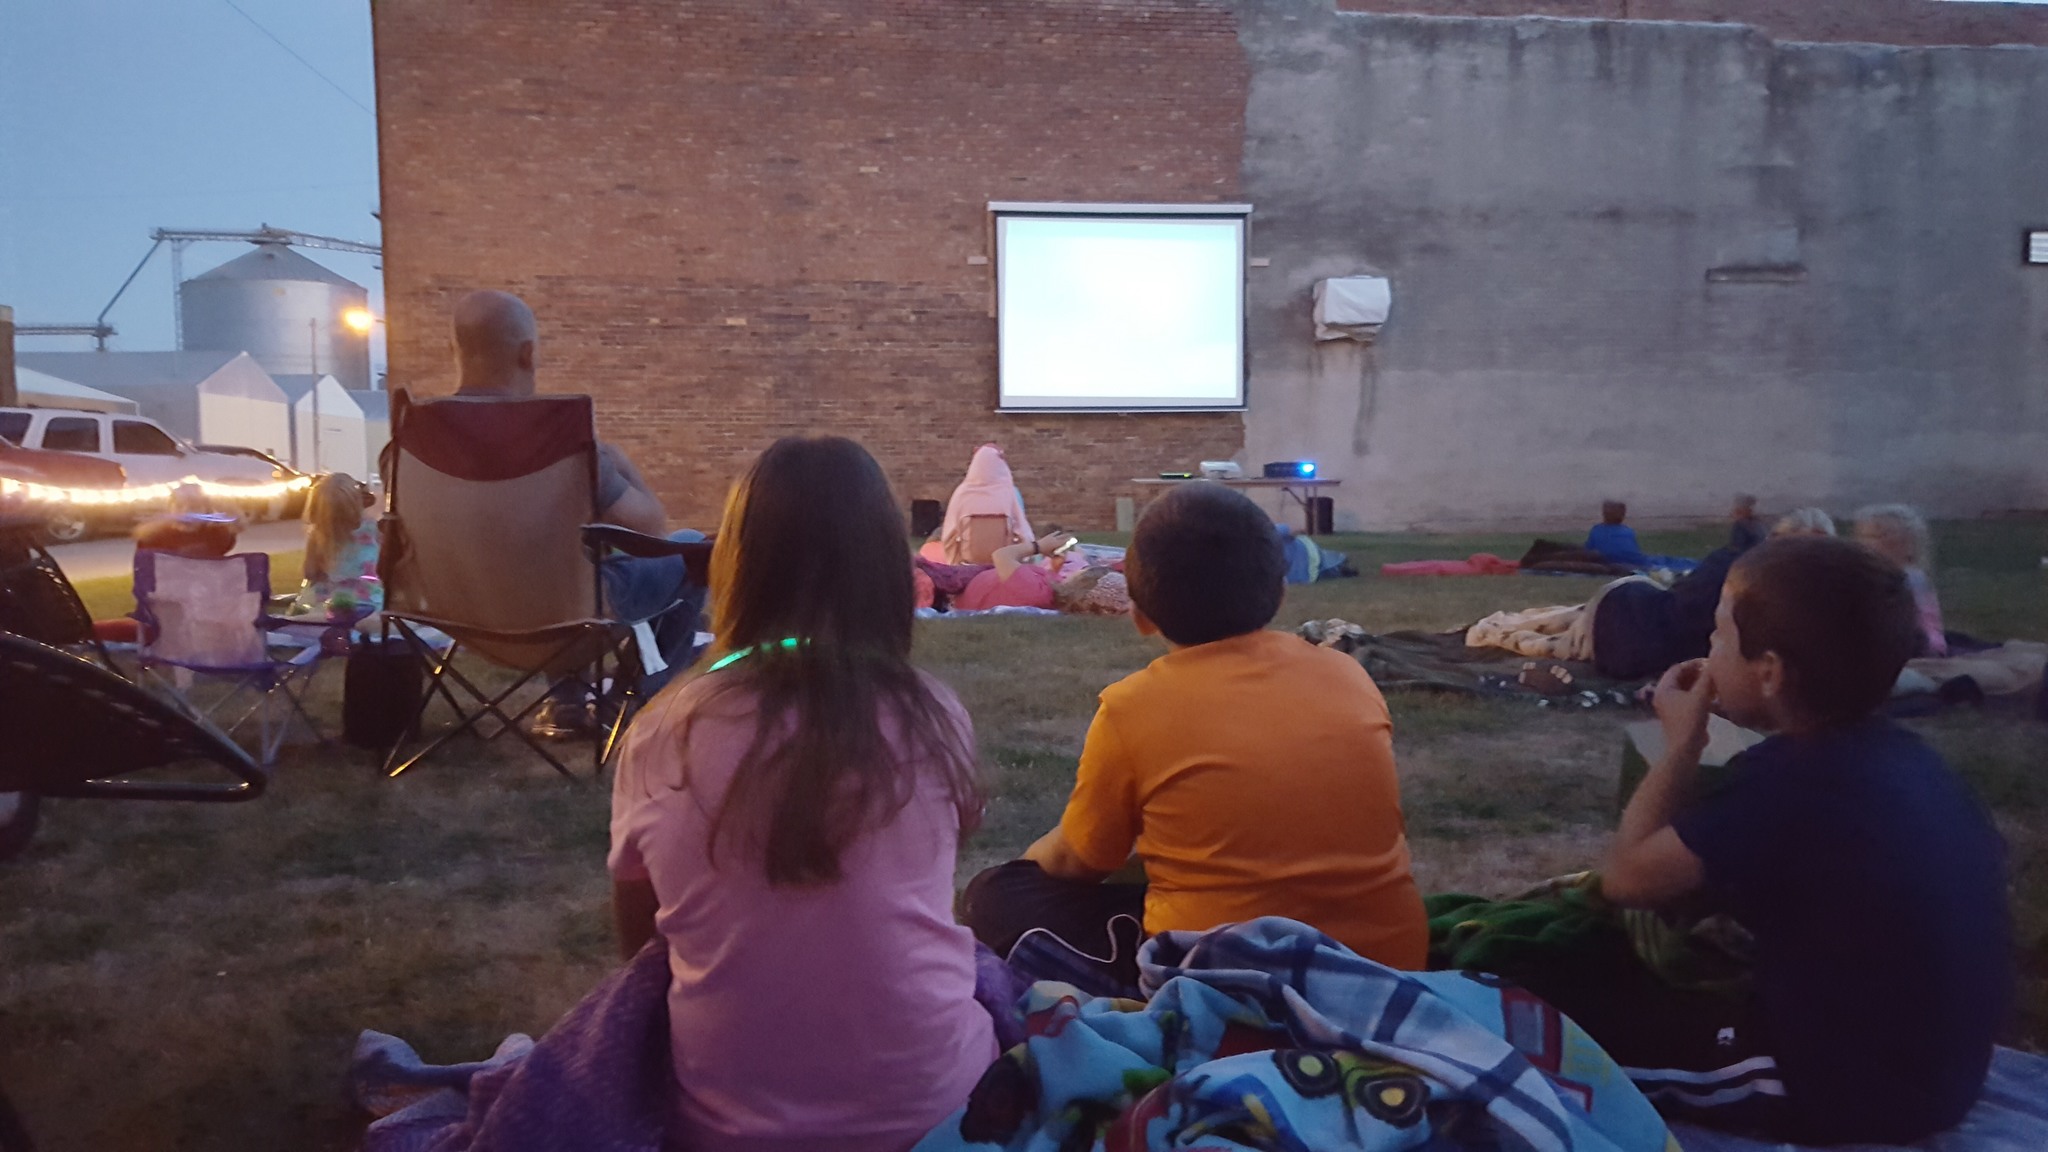 A group of people watching a movie outdoors on a video screen on the side of a brick building.